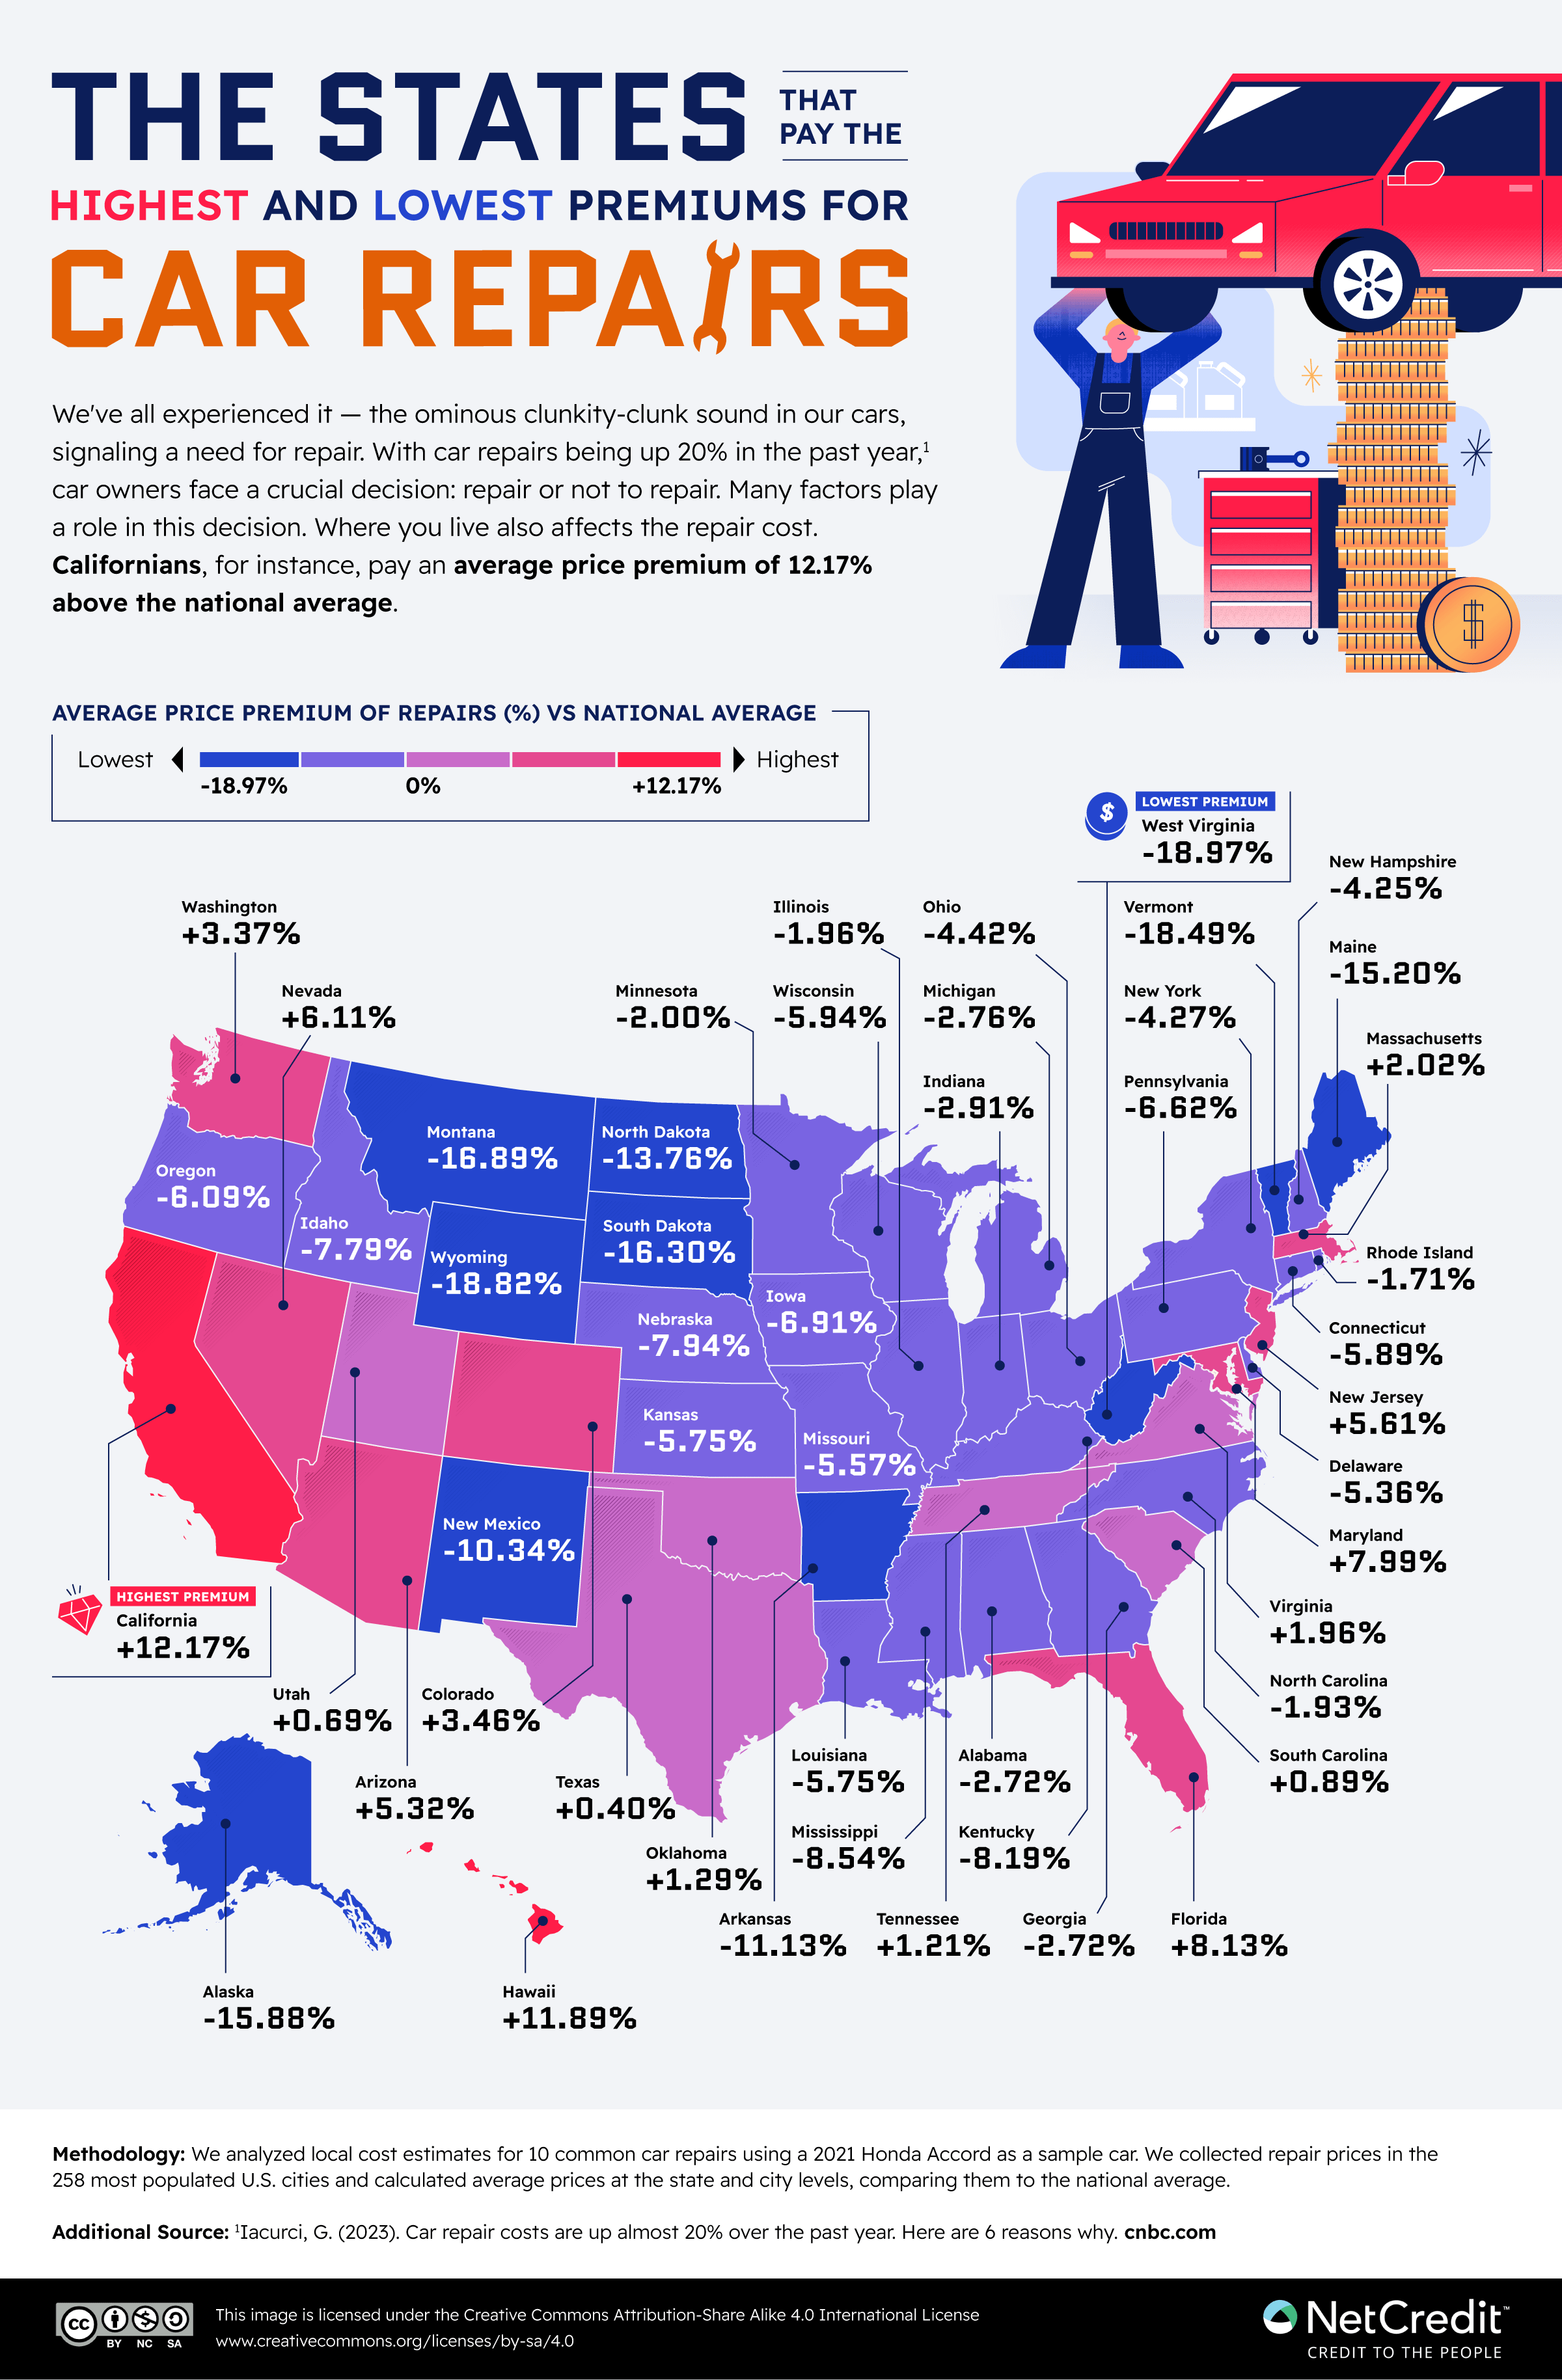 Infographic of the states that pay the highest and lowest premiums for car repairs.